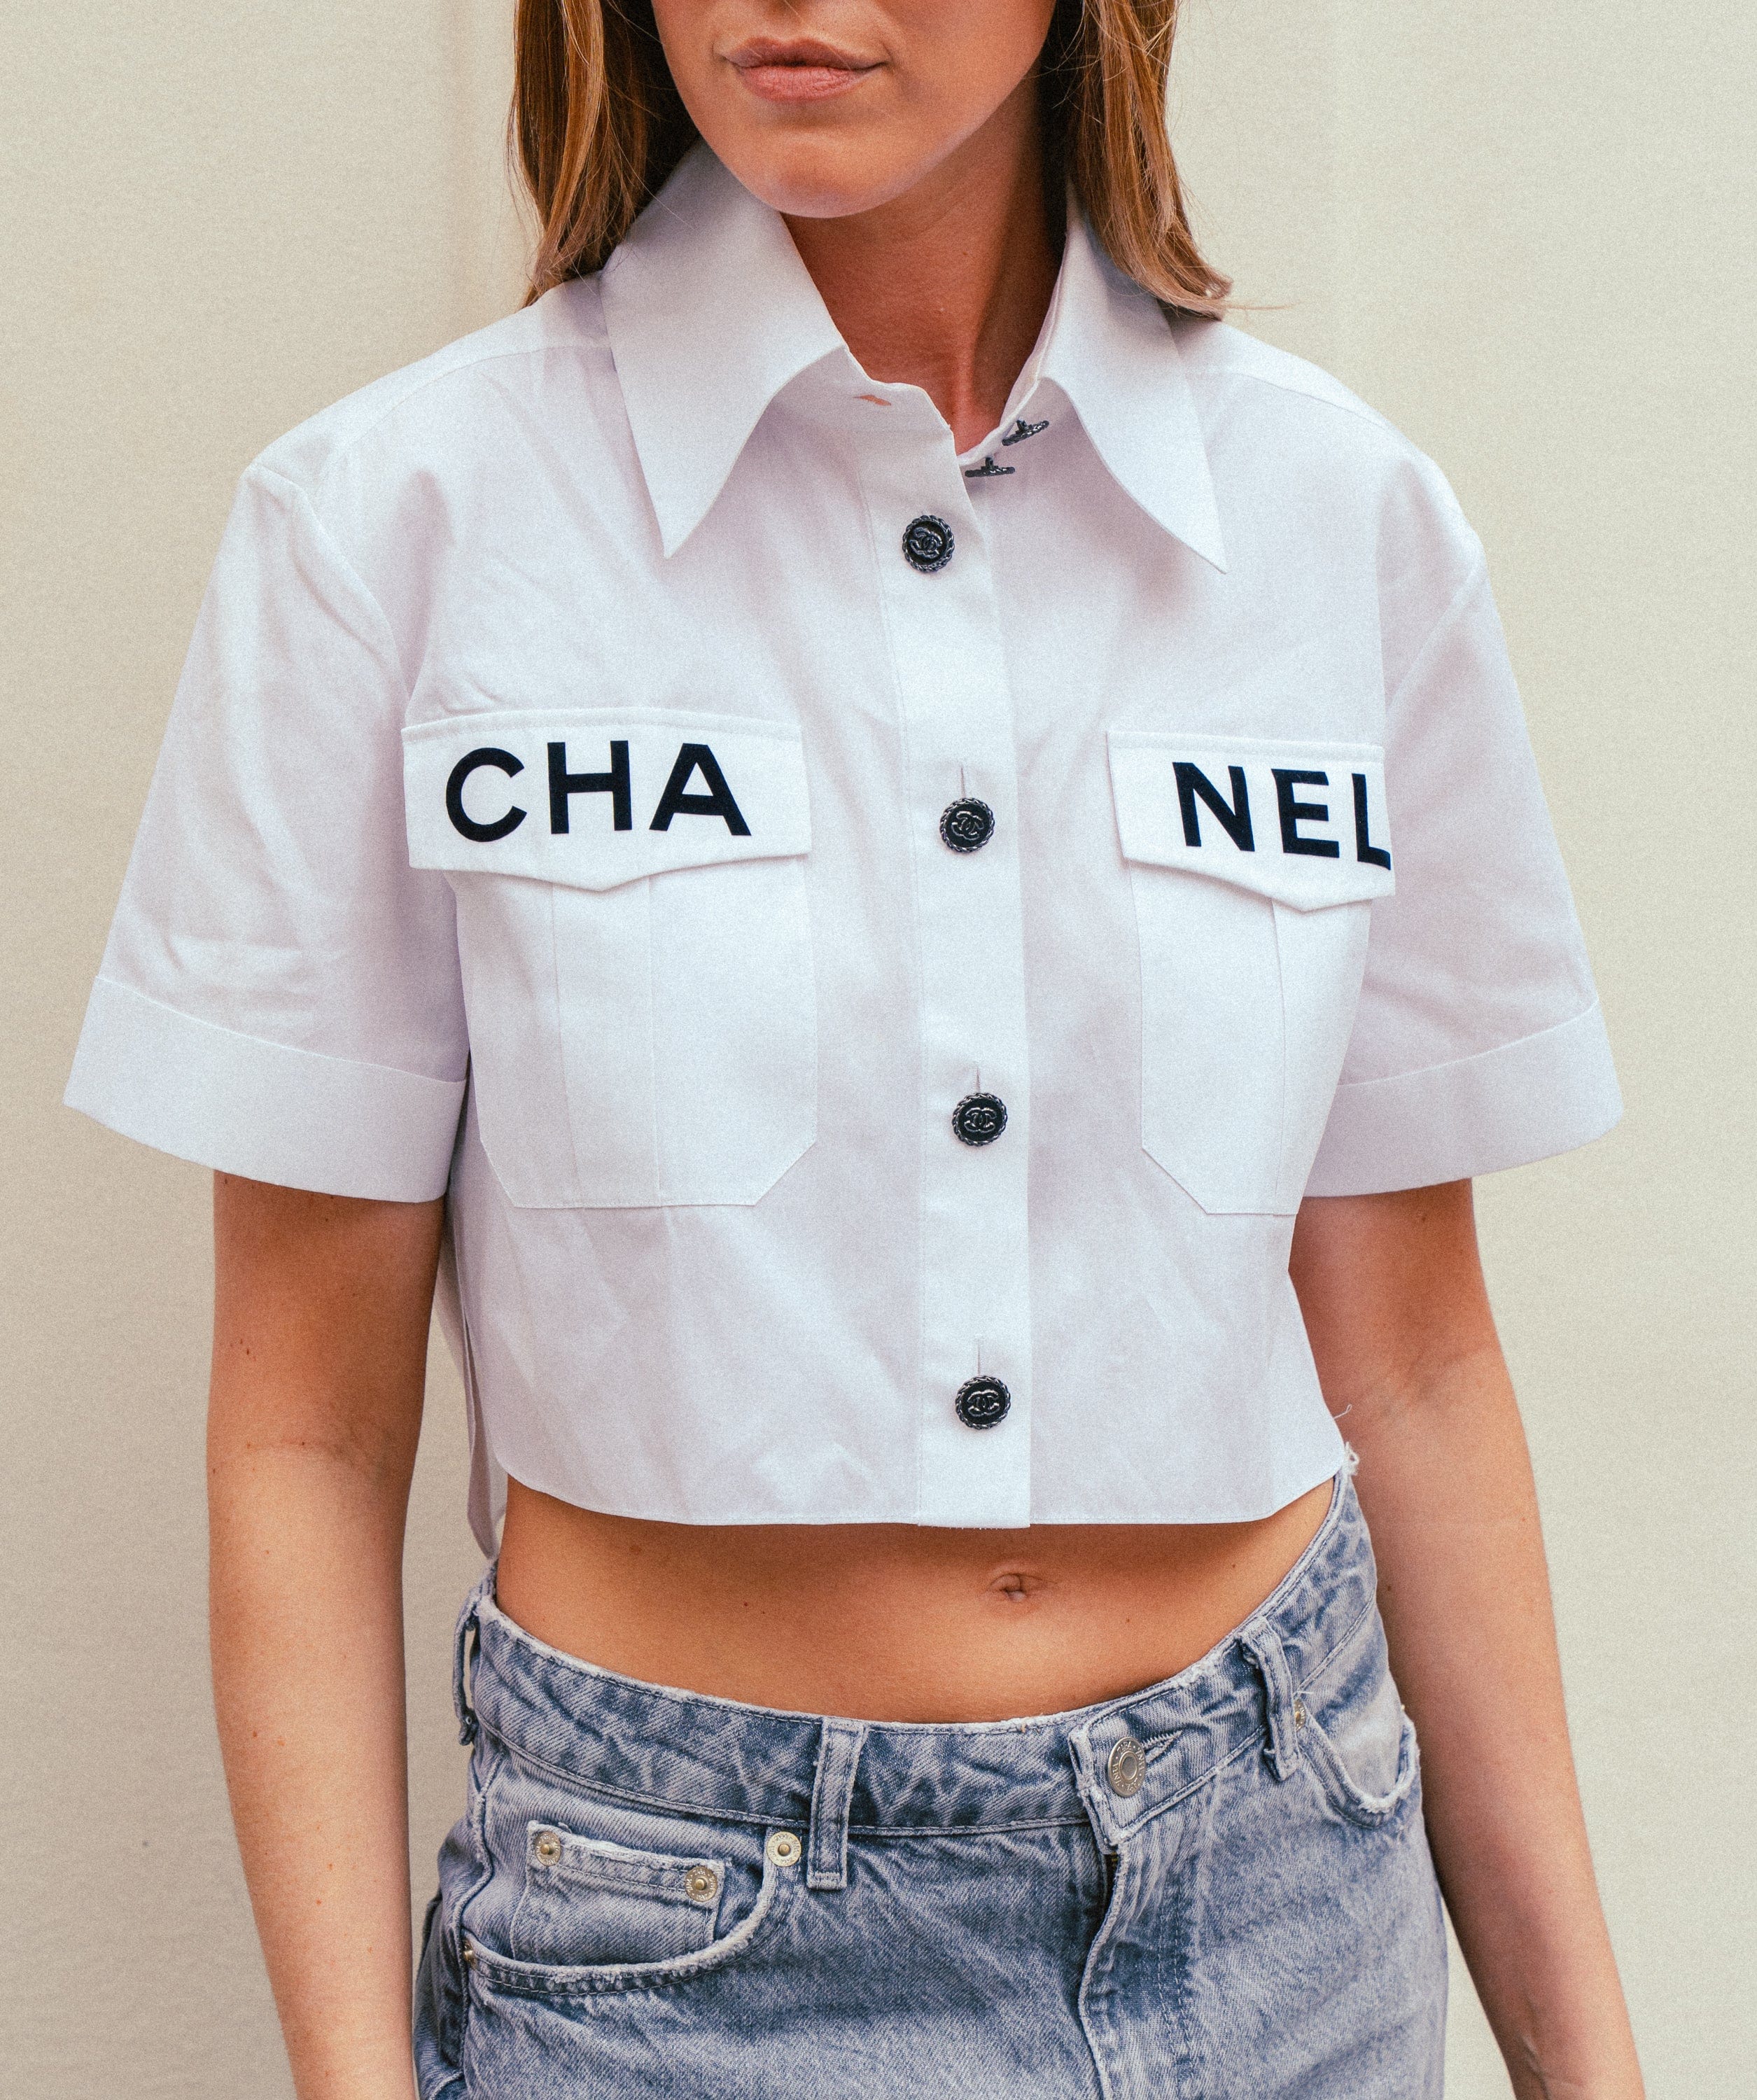 shifa¹⁰ on X: chanel released an f1 shirt hello??? I WANT IT SO